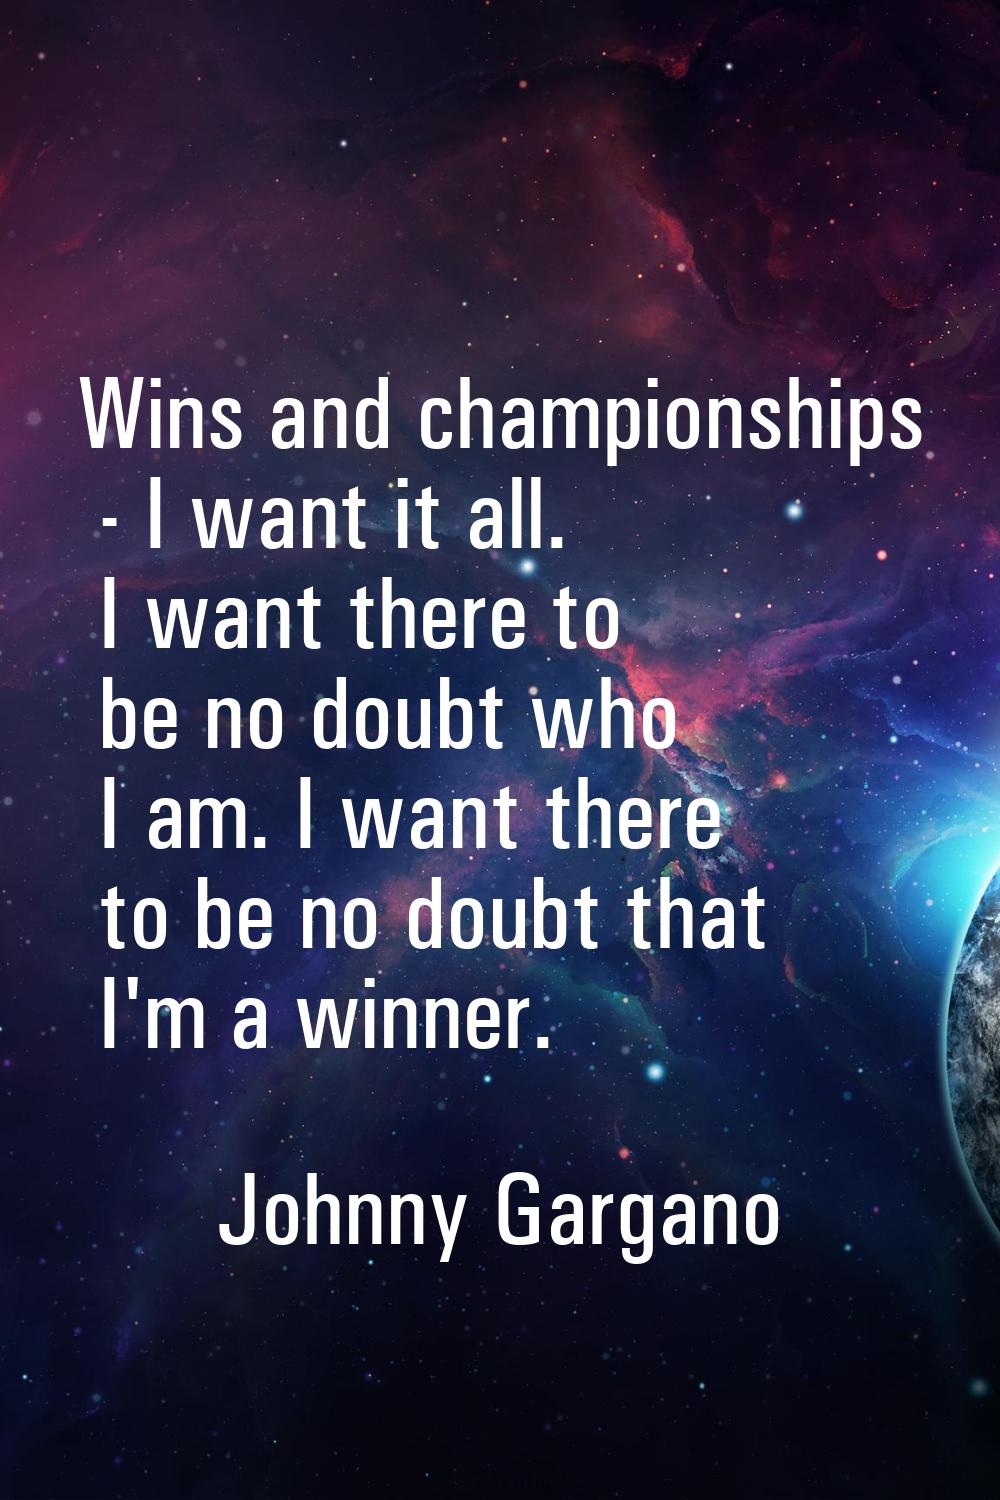 Wins and championships - I want it all. I want there to be no doubt who I am. I want there to be no